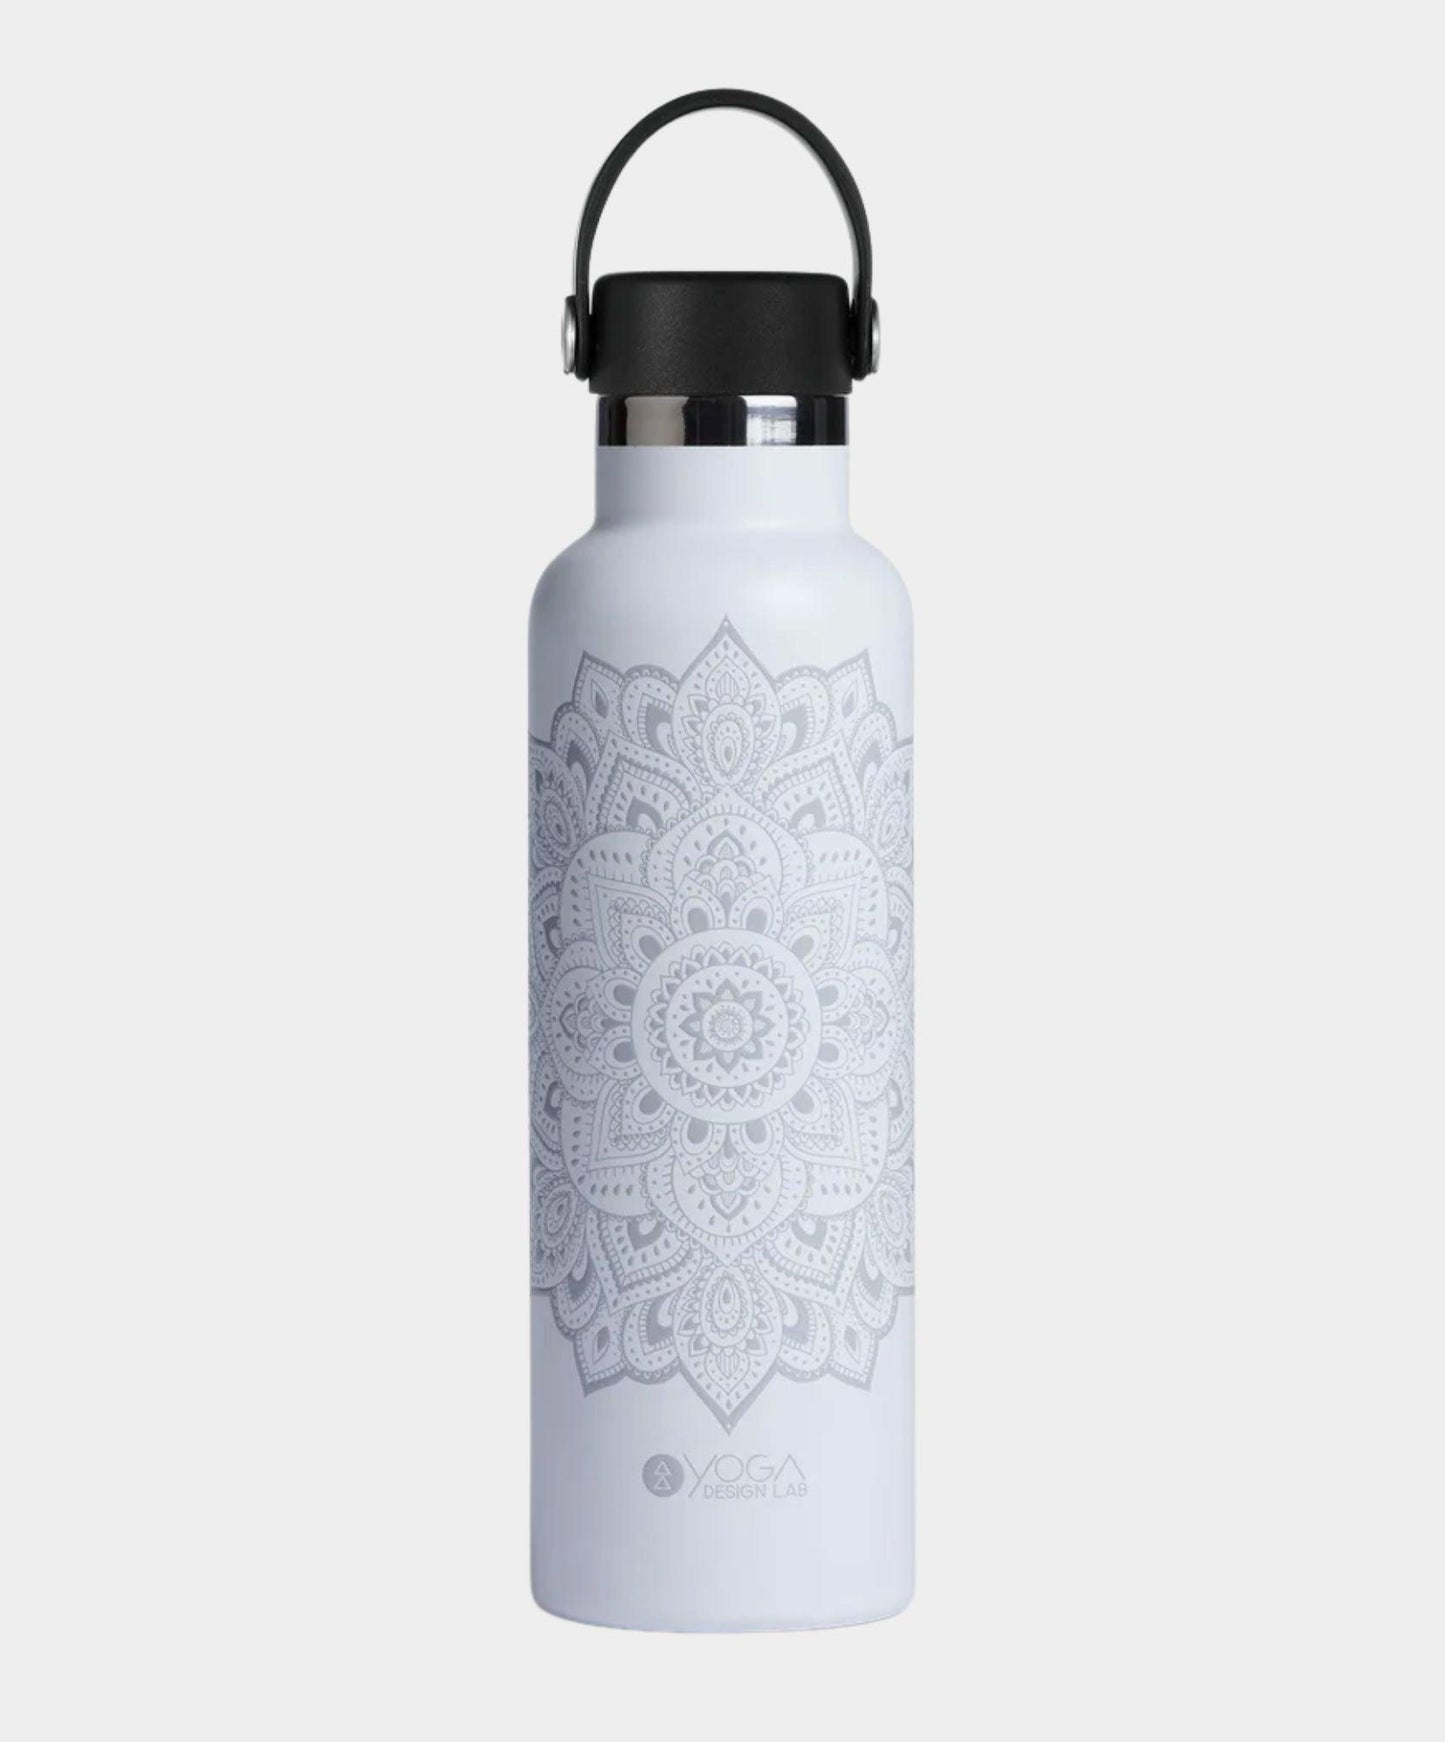 YDL Water Bottle - Beautiful Design, Stainless Steel, Insulated